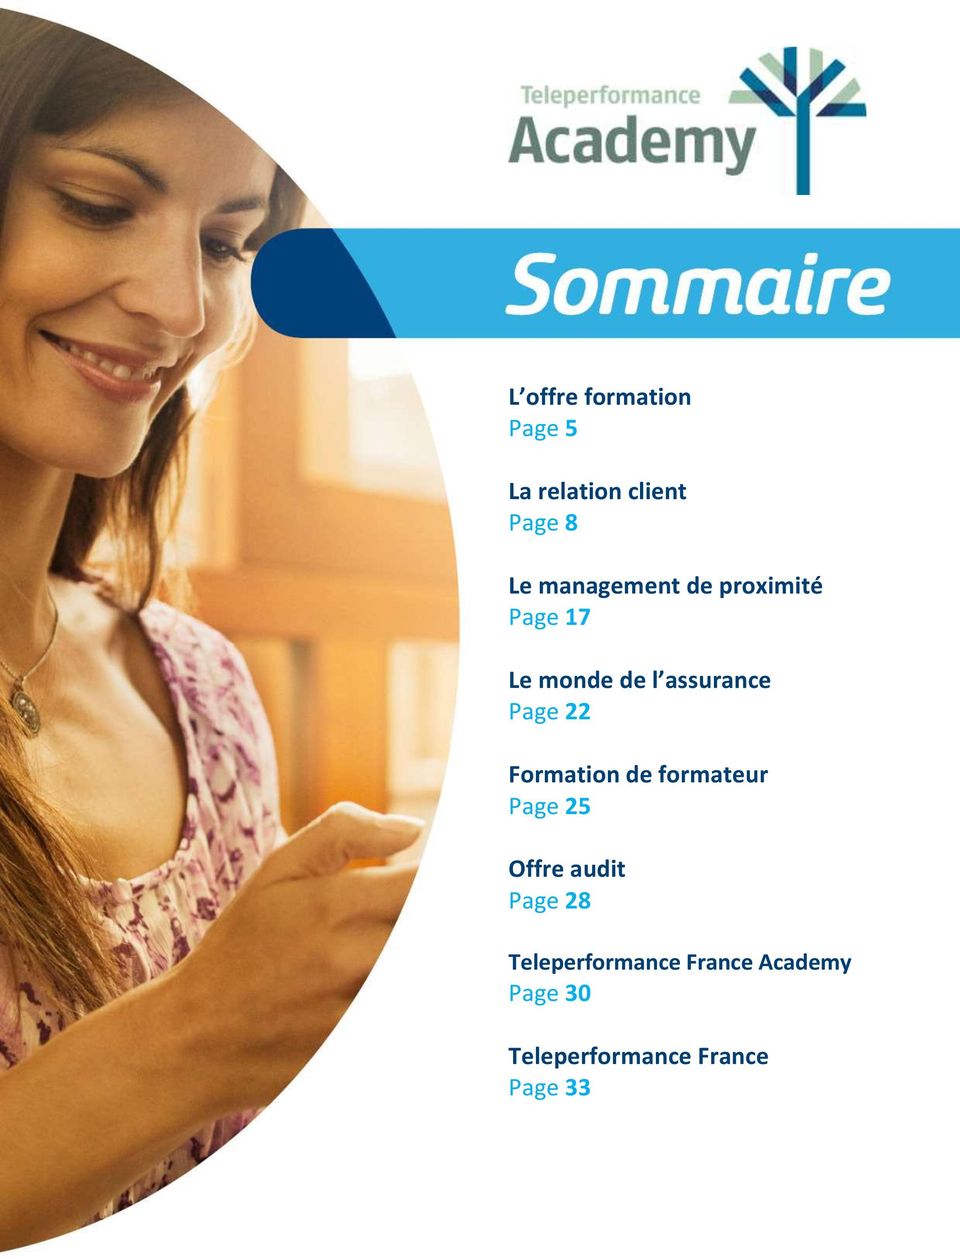 formateur Page 25 Offre audit Page 28 Teleperformance France Academy